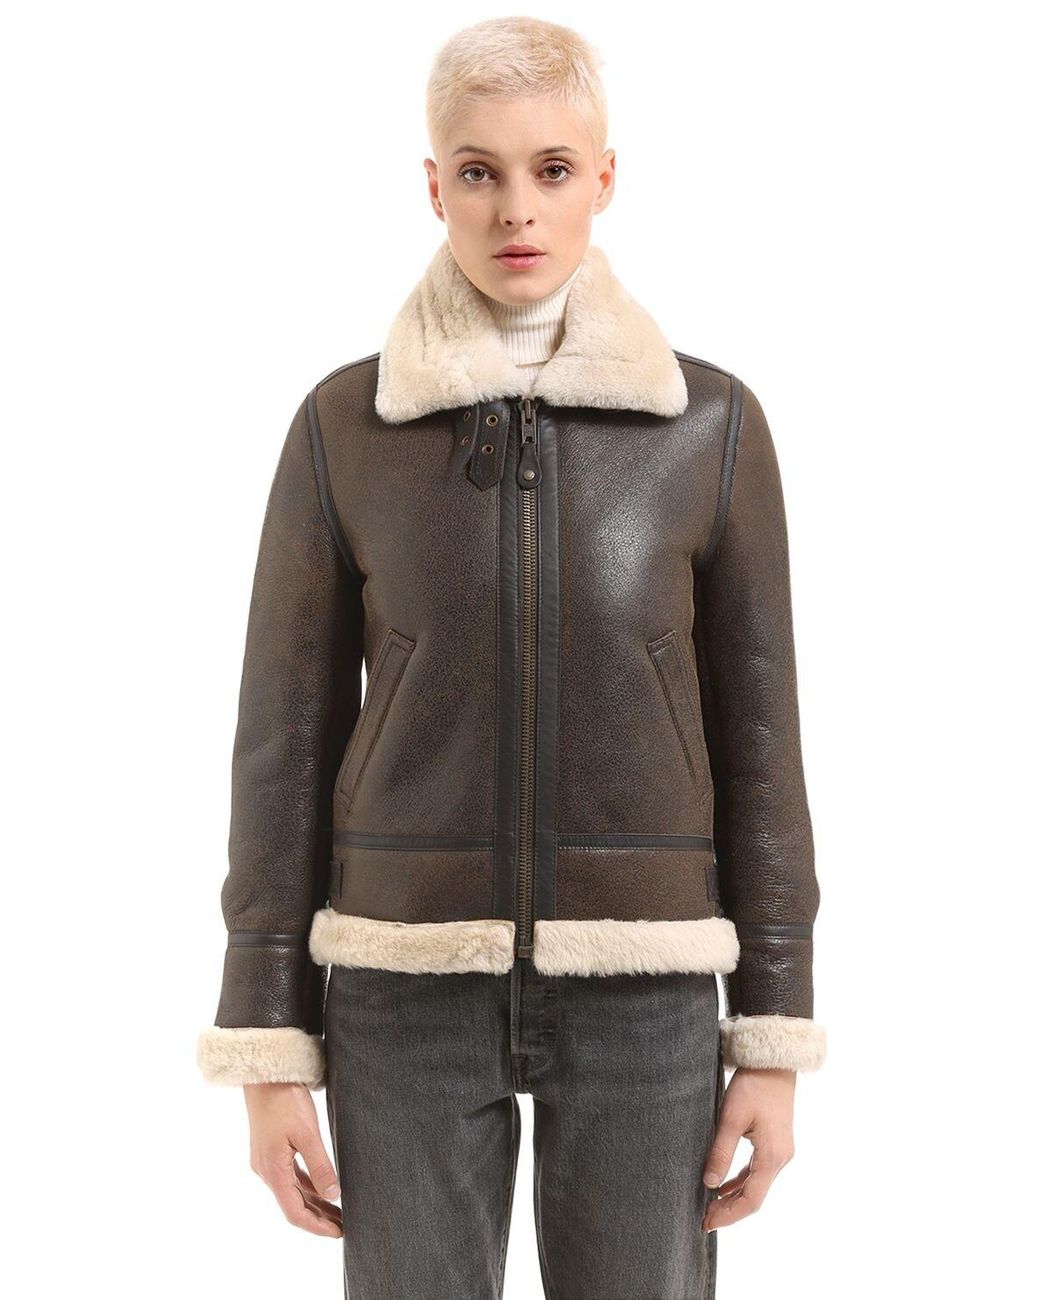 Schott Nyc Lcw 1257 Leather Aviator Jacket in Brown - Lyst